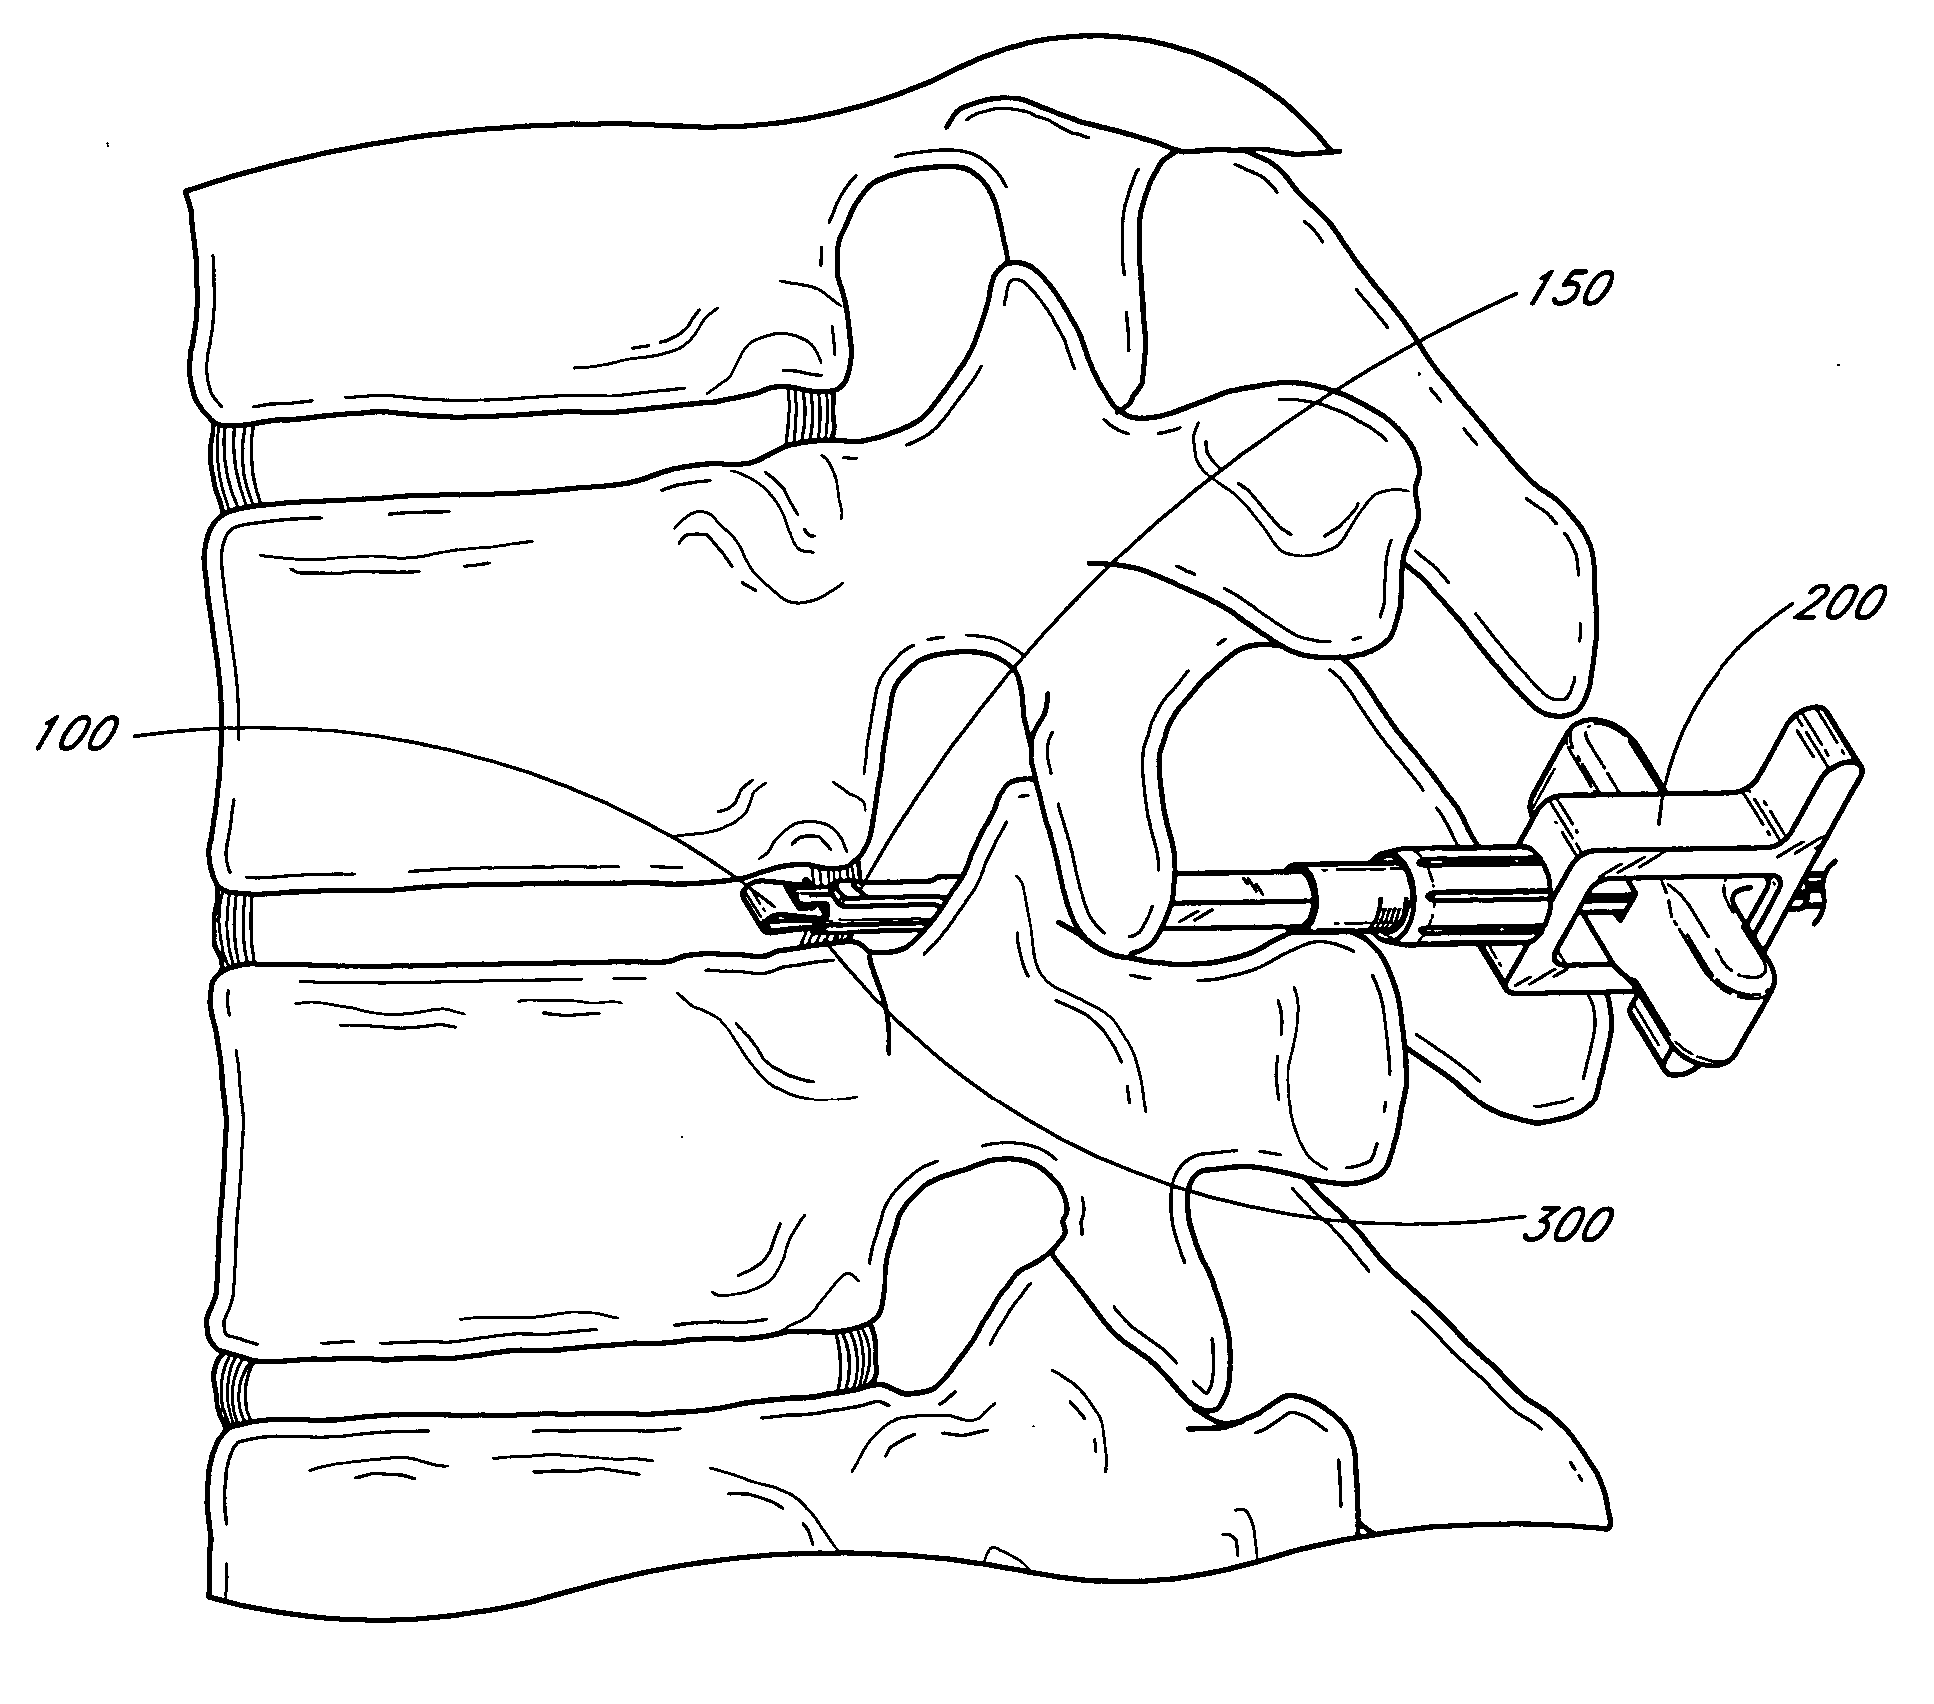 Minimally invasive method for delivery and positioning of intervertebral disc implants